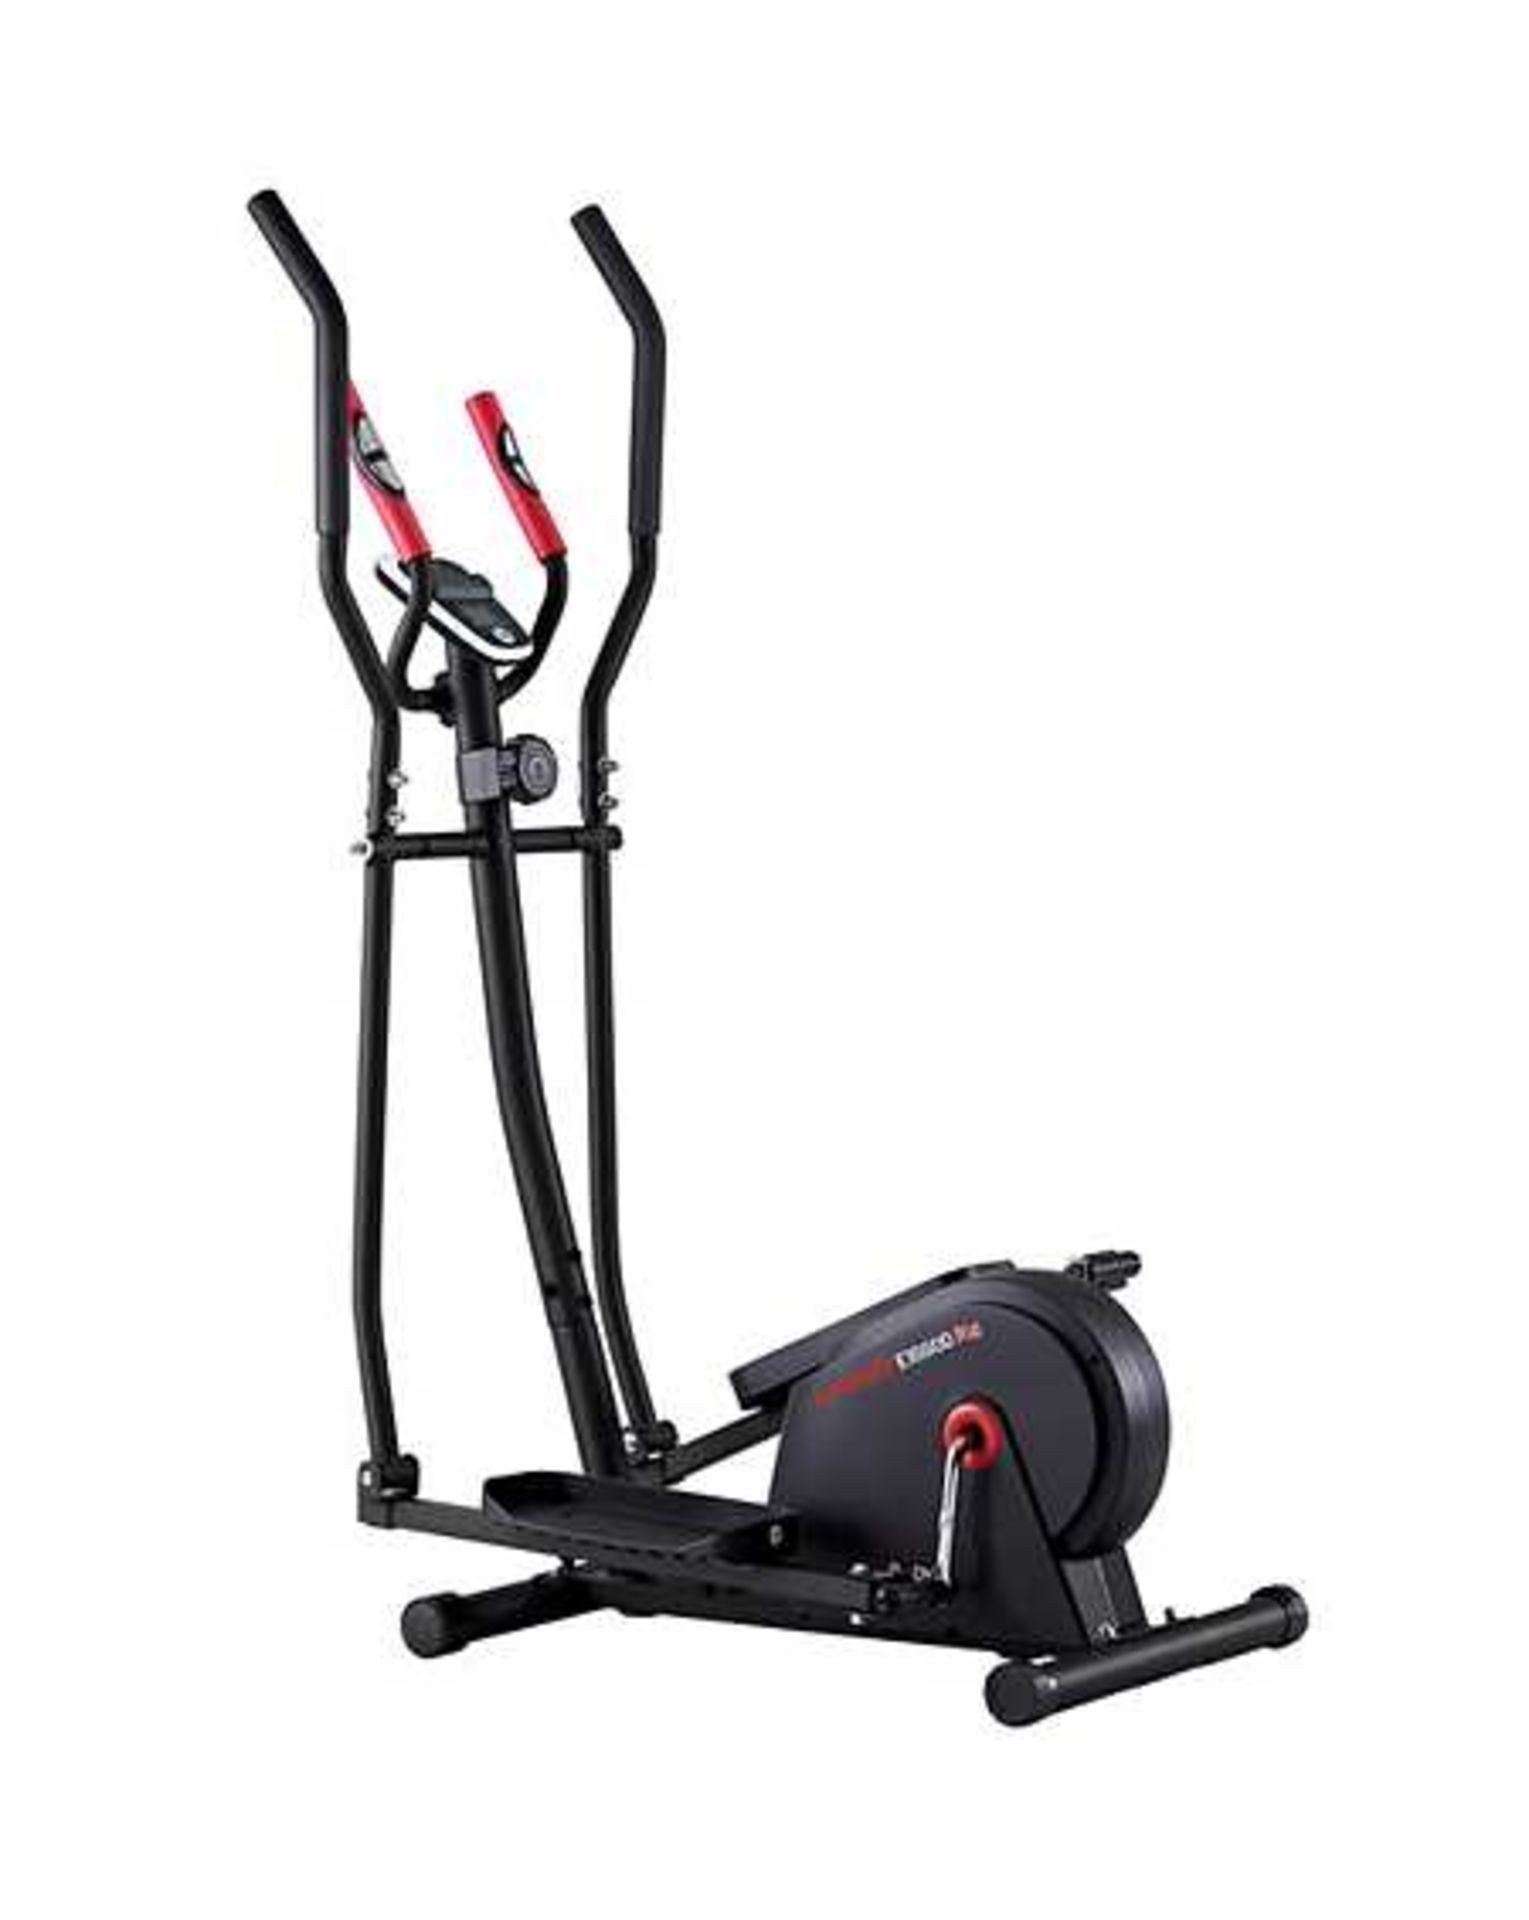 NEW & BOXED BODY SCULPTURE Magnetic Strider R12-9. RRP £189.99. Magnetic resistance for a smooth